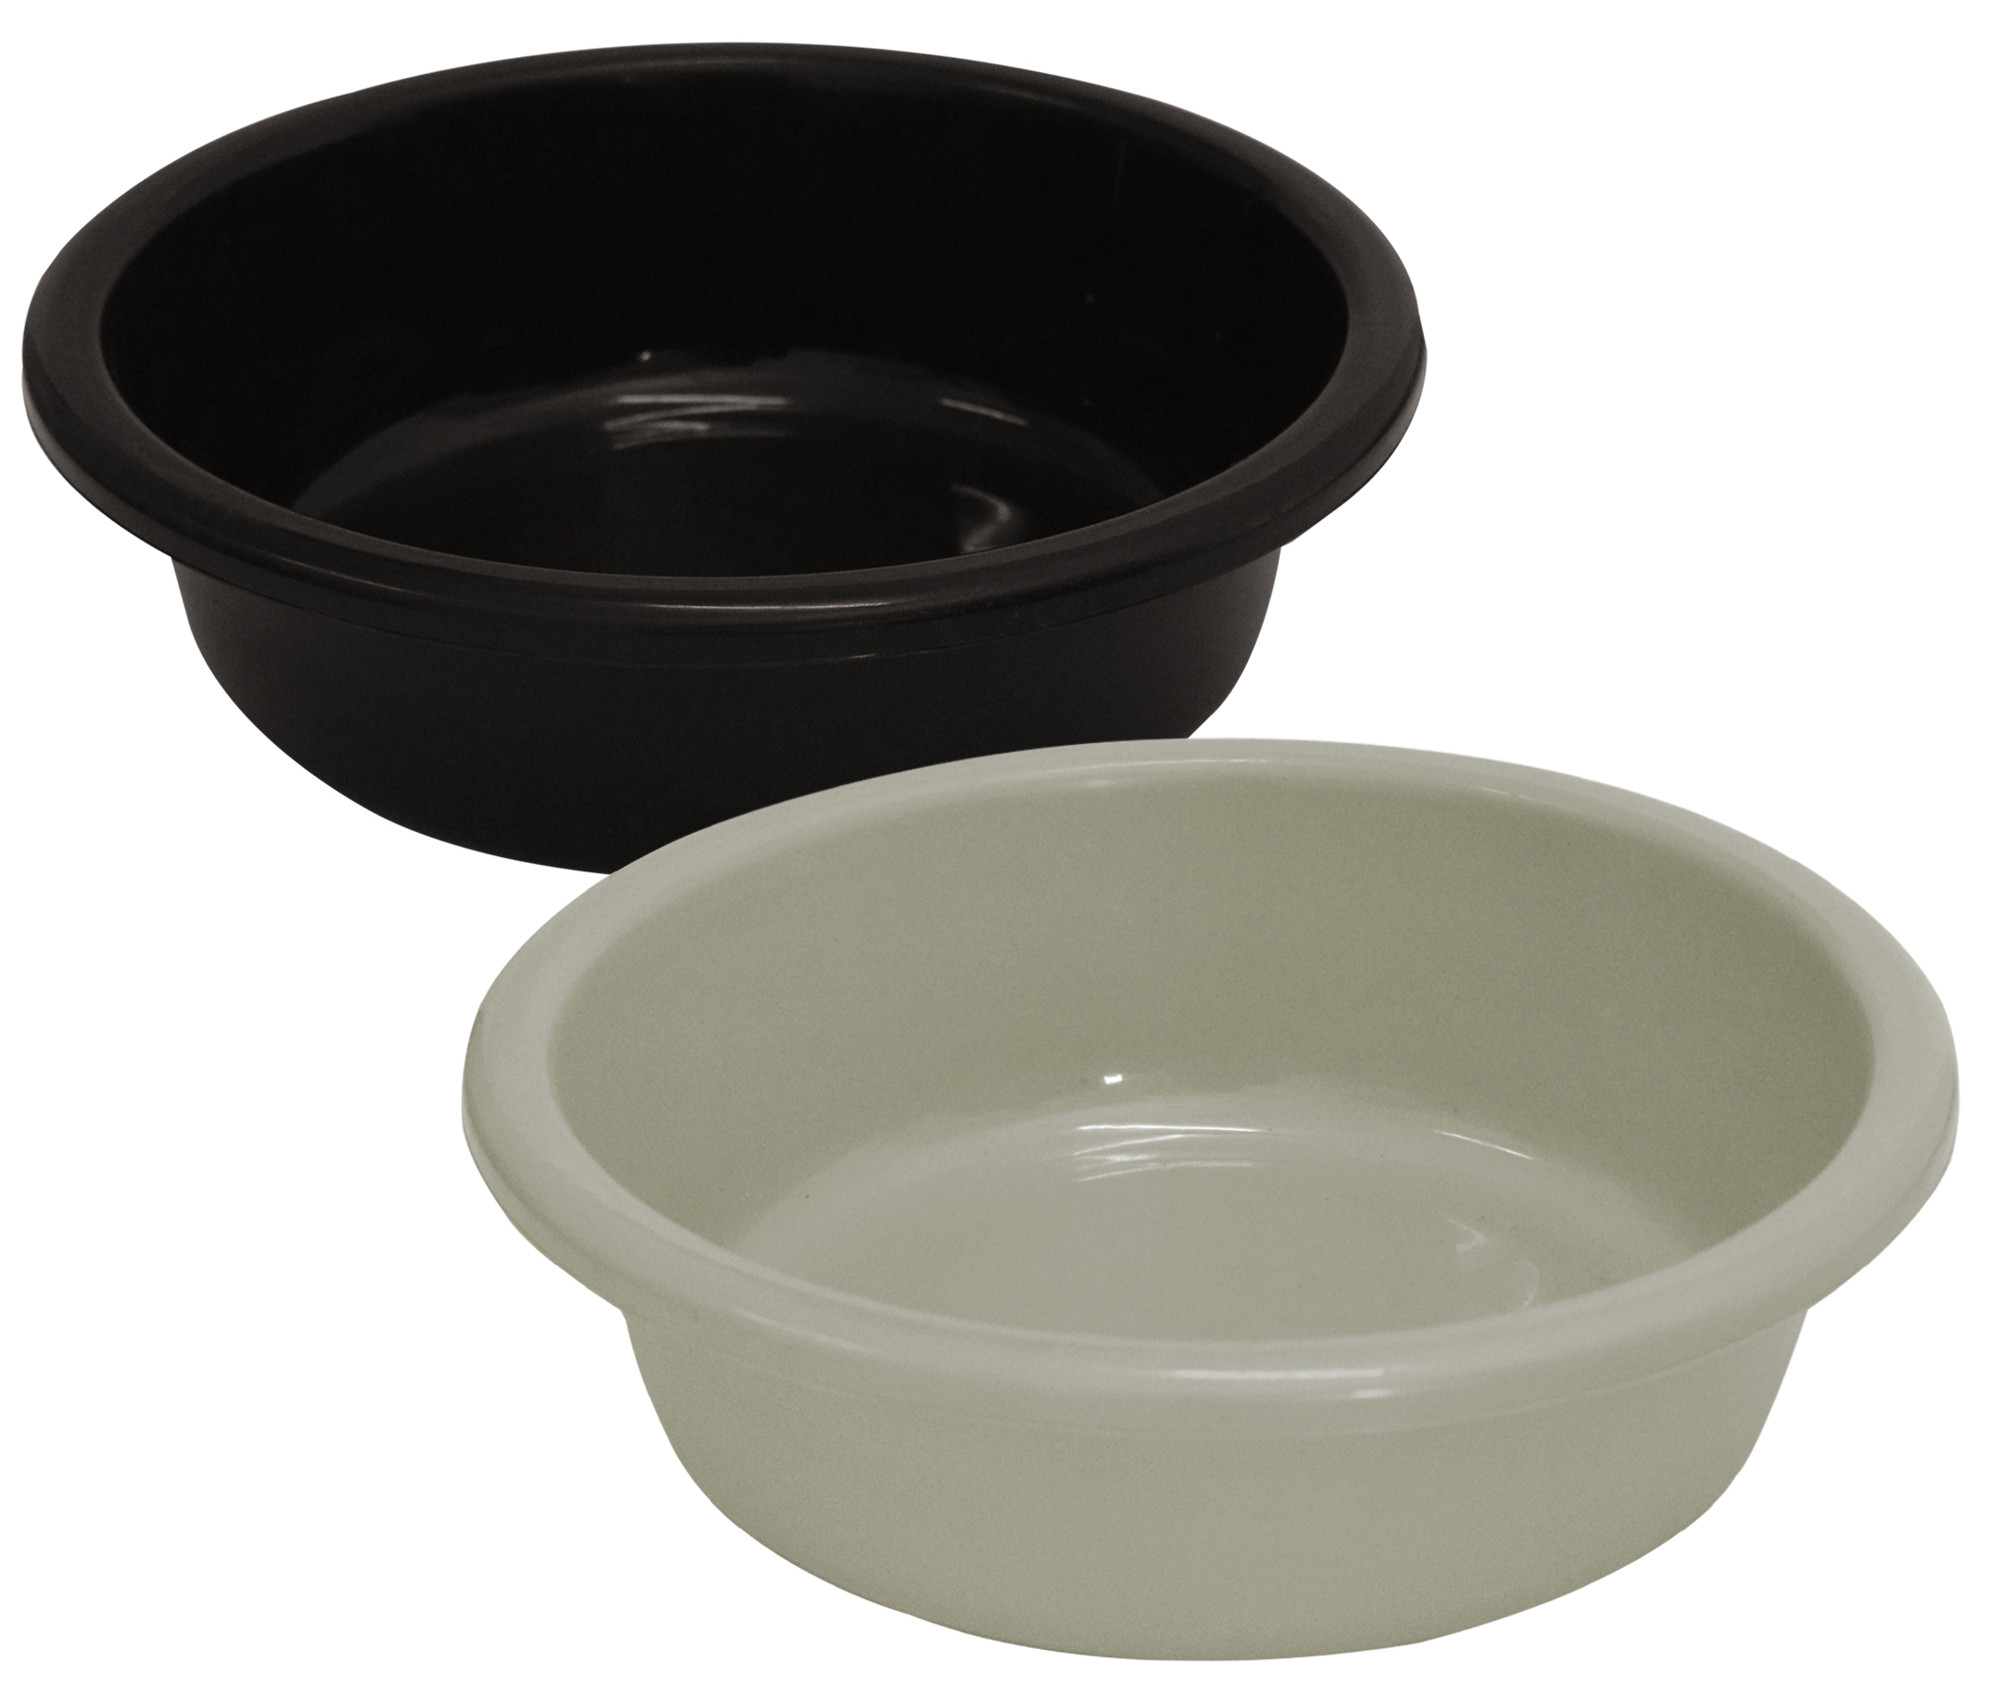 Kuber Industries Multiuses Unbreakable Plastic Knead Dough Basket/Basin Bowl For Home & Kitchen 6 Ltr- Pack of 2 (Black & Grey)